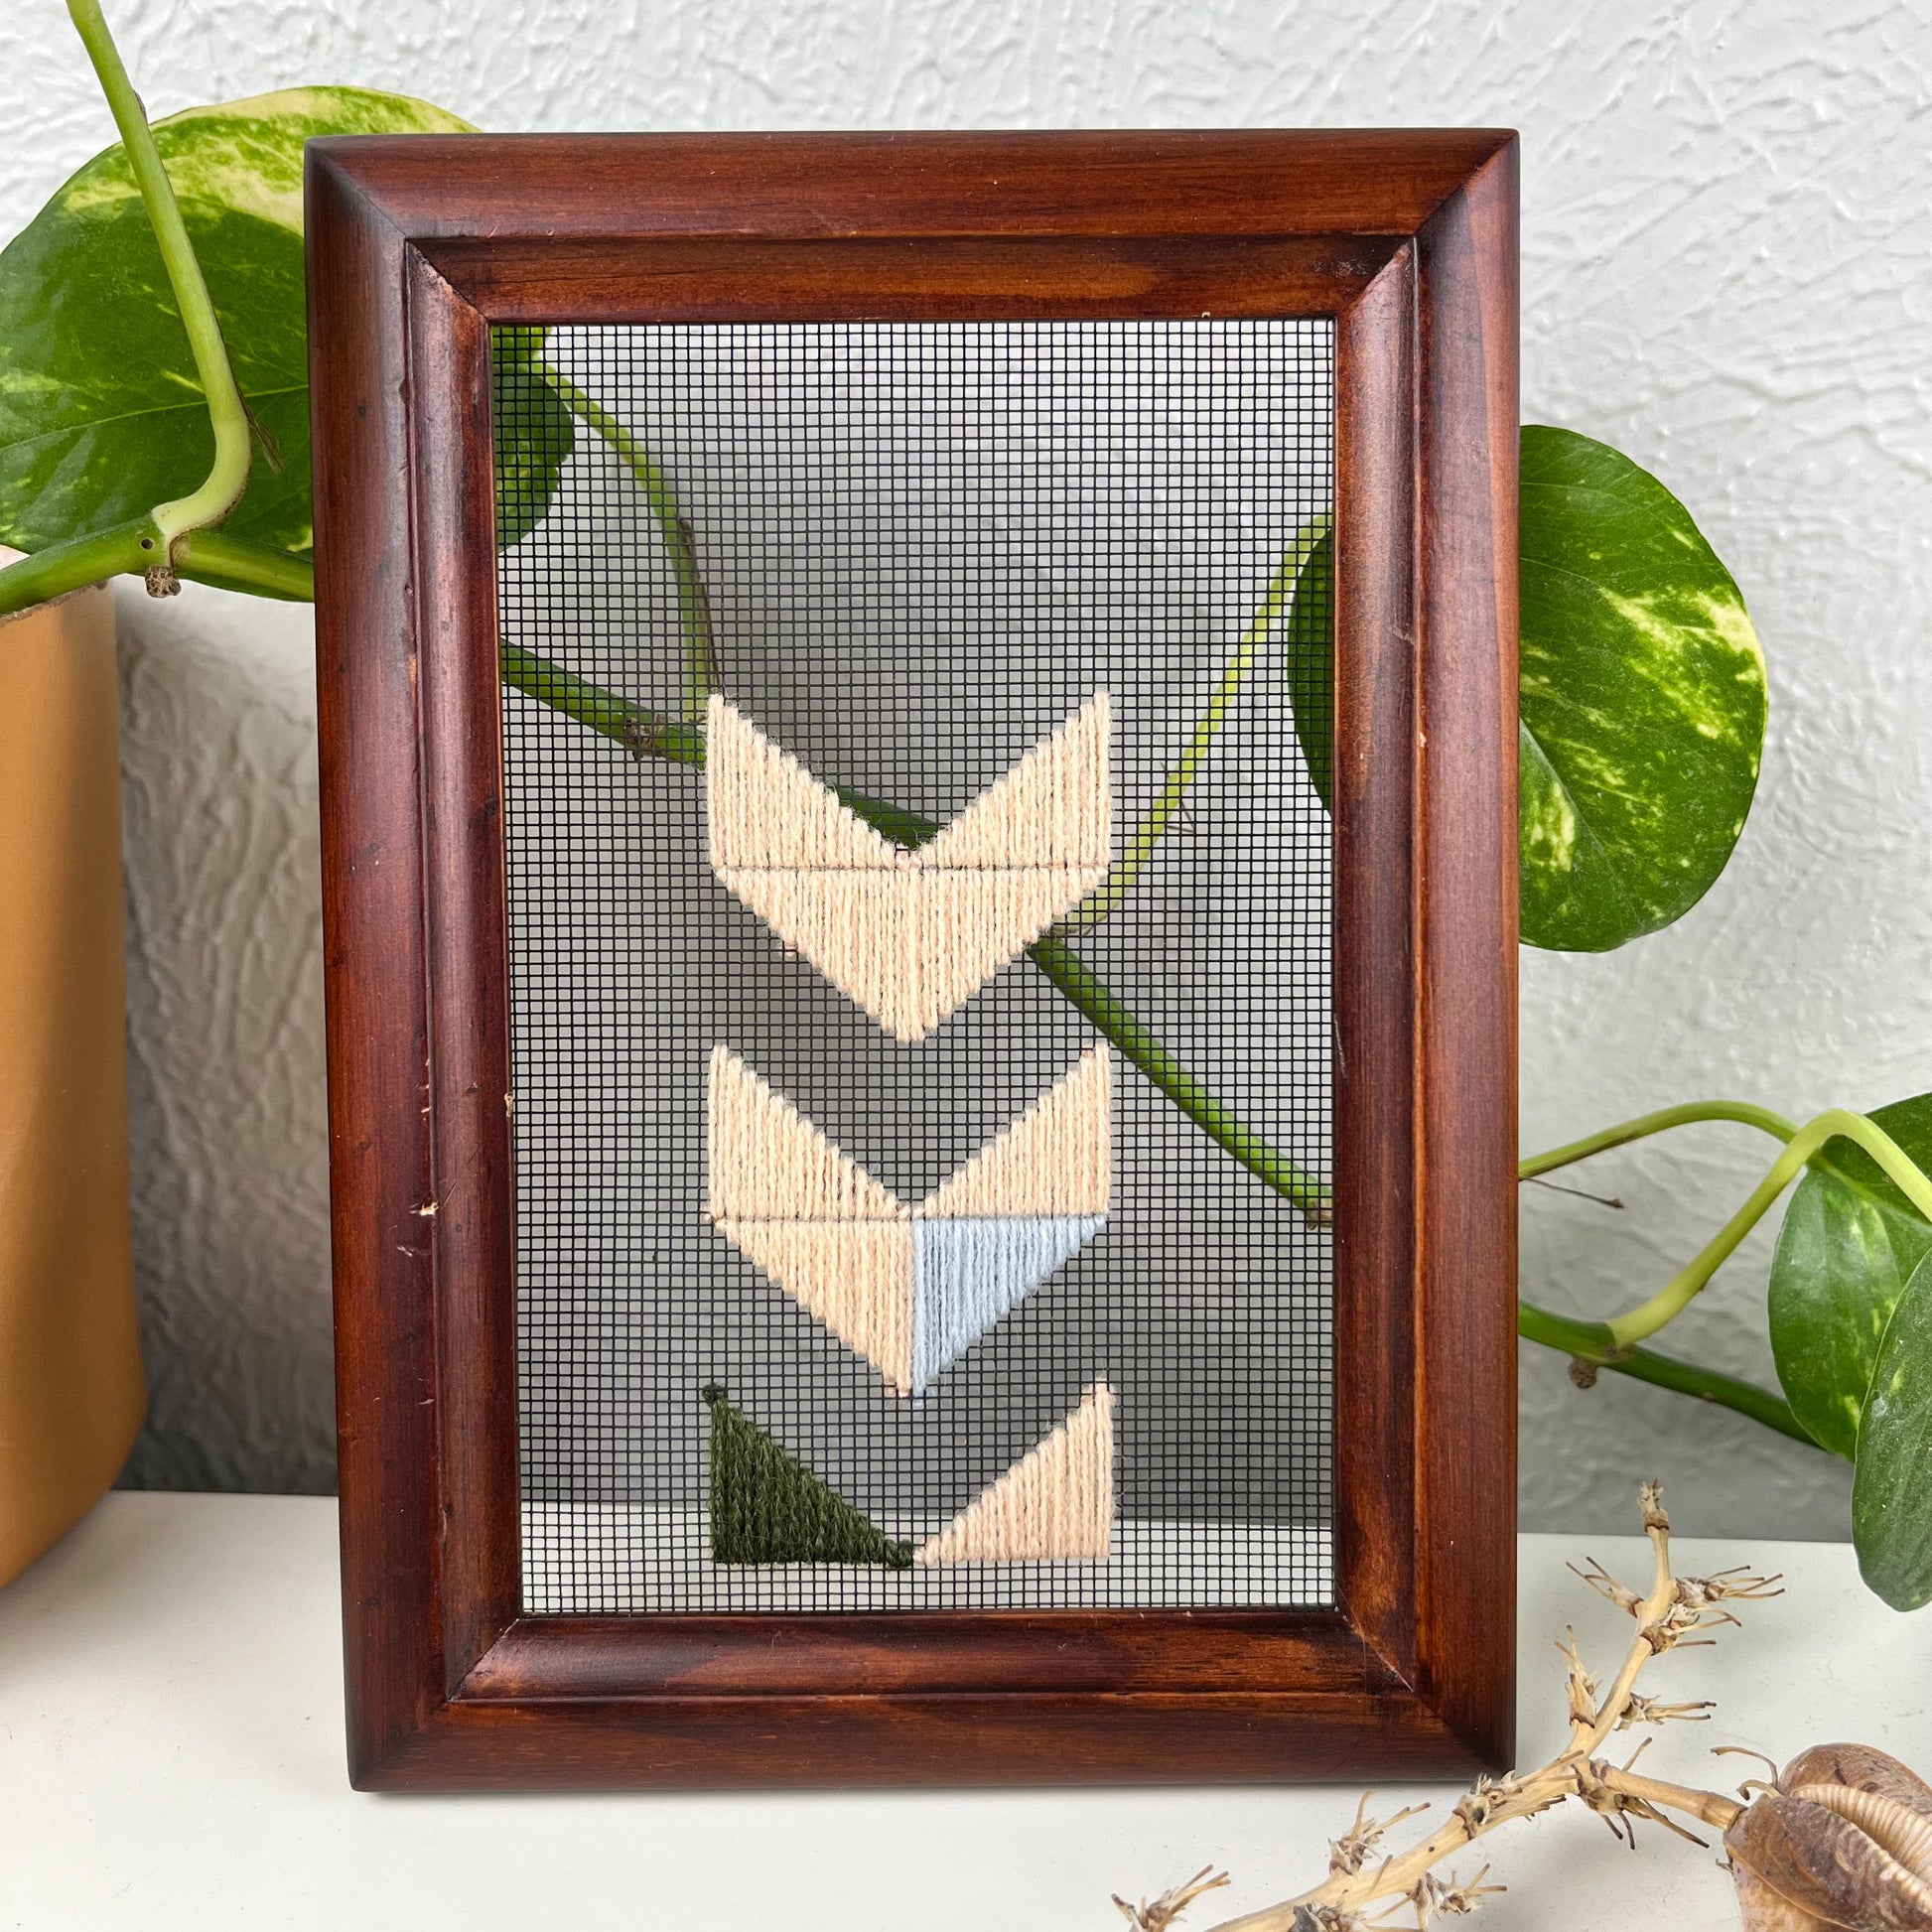 a piece of window screen hand stitched with triangles forming large chevrons centered on the screen, running off the bottom, mostly in peach with some light blue and olive green, in a wood frame, on a white counter, with a pothos behind it